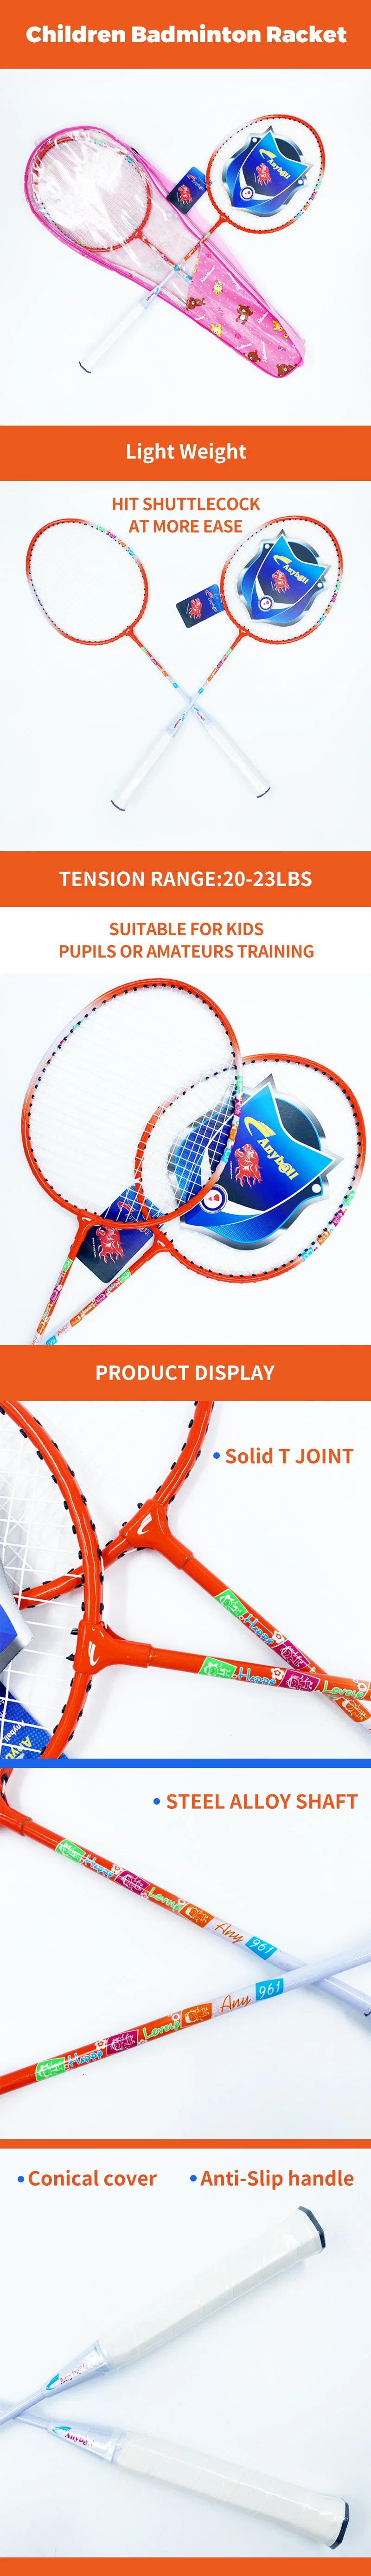 China Factory Selling Best Iron Steel Alloy Wholesale Cheap Badminton Racket for Amateur Beginner Playing Anyball